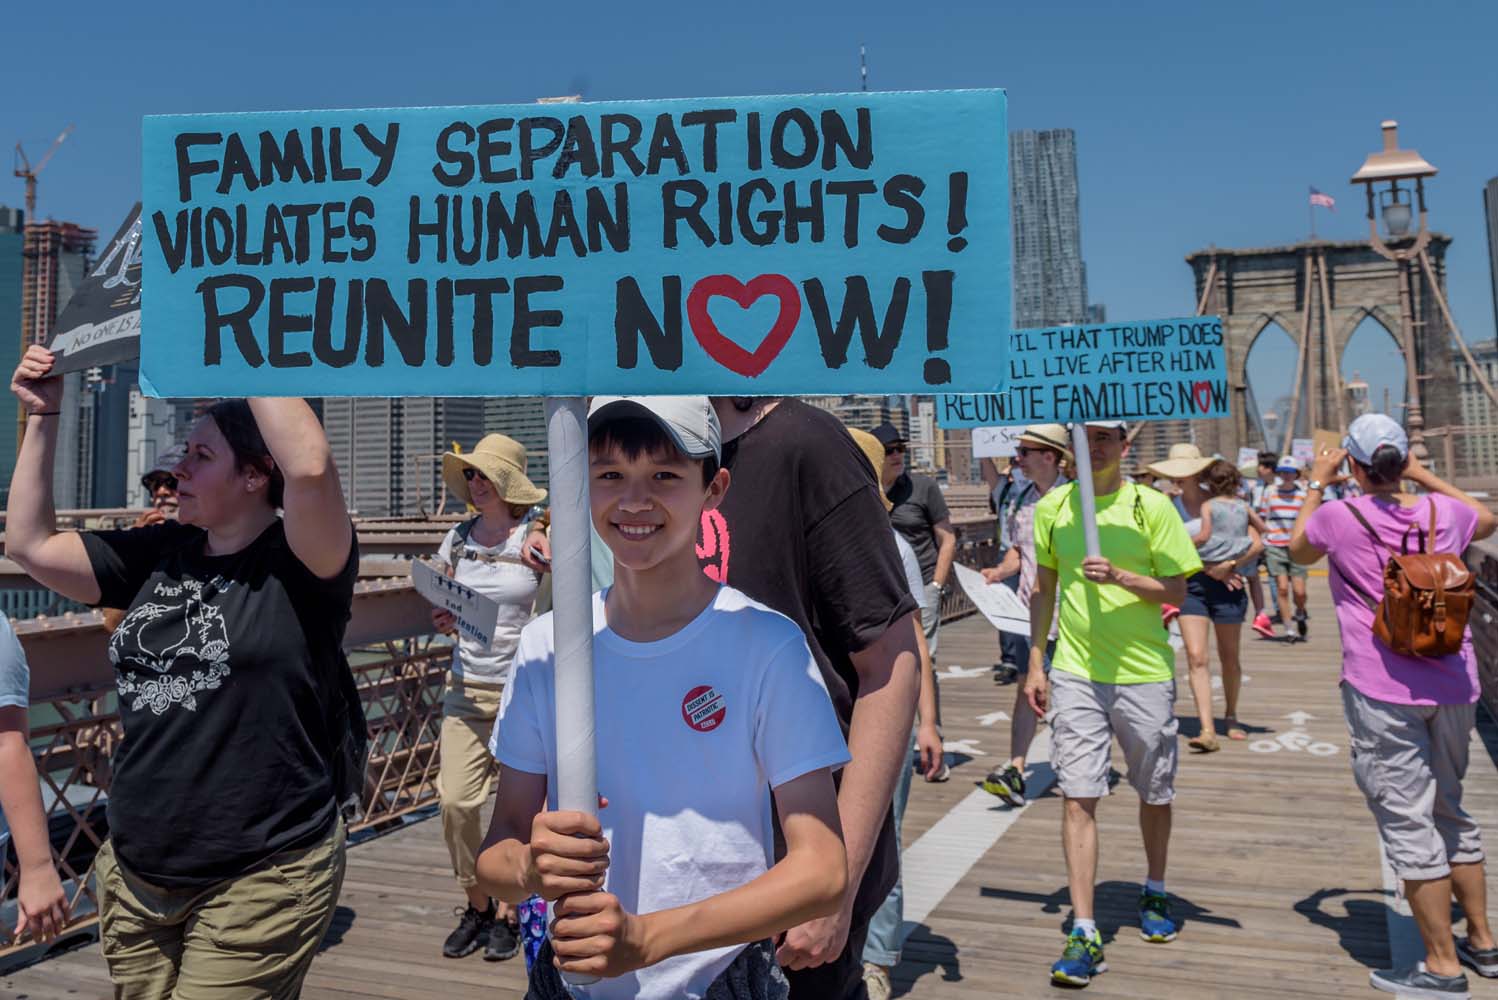 #FamiliesBelongTogether marches in US